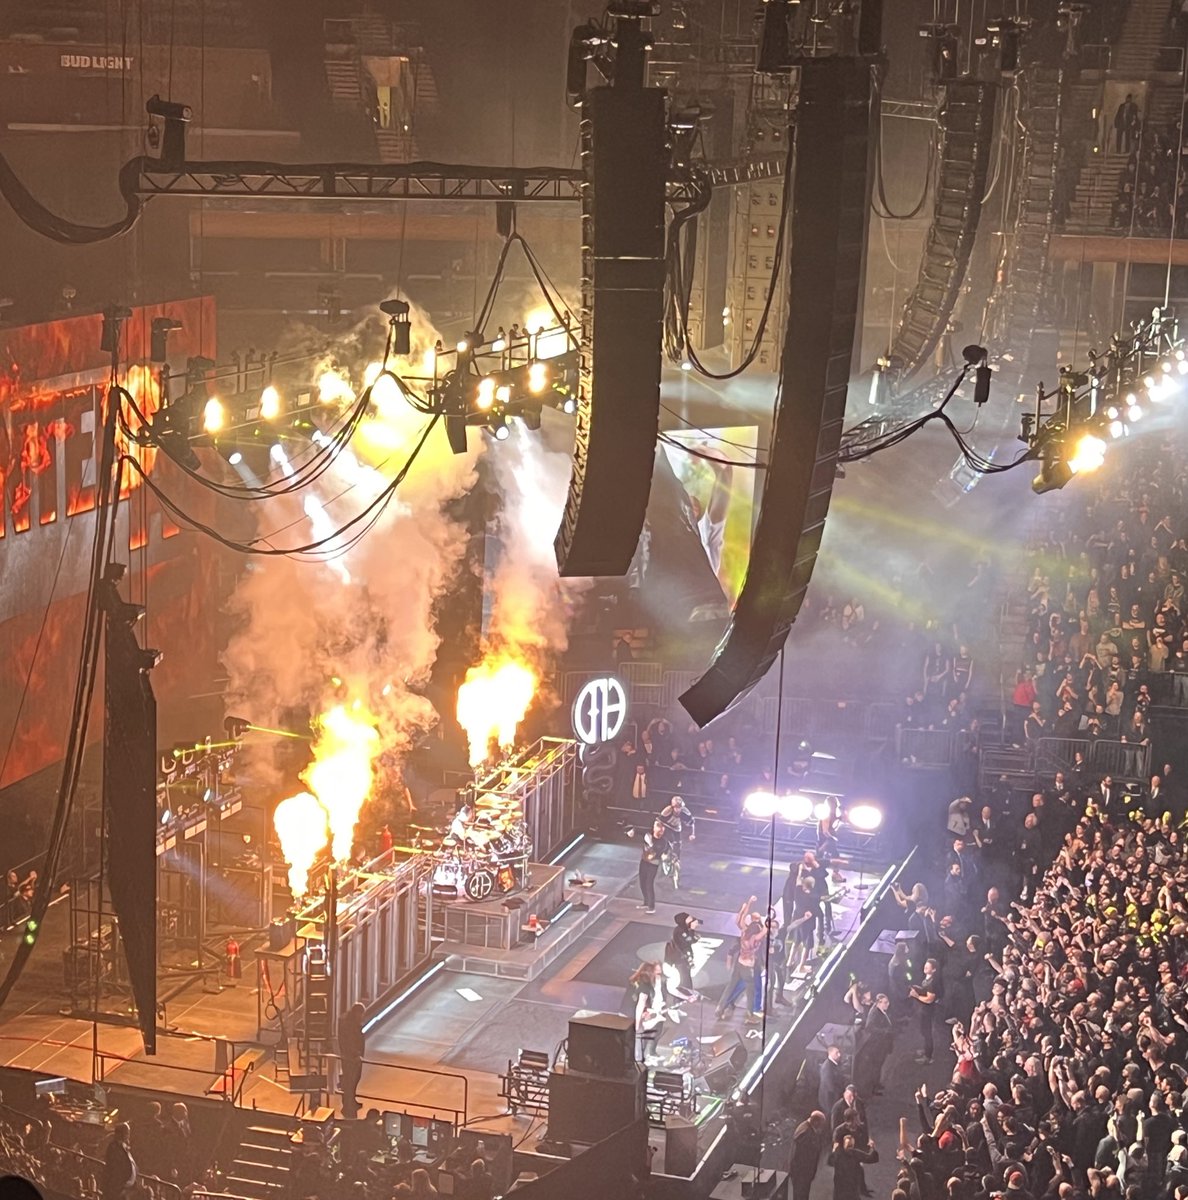 @Pantera @philiphanselmo @RexBrownOffic @ZakkWyldeBLS @skisum @dimebagdarrell @VinniePaulOffic @TheGarden One of the best shows i’ve seen in a very long time. Top 3 live bands i’ve seen.